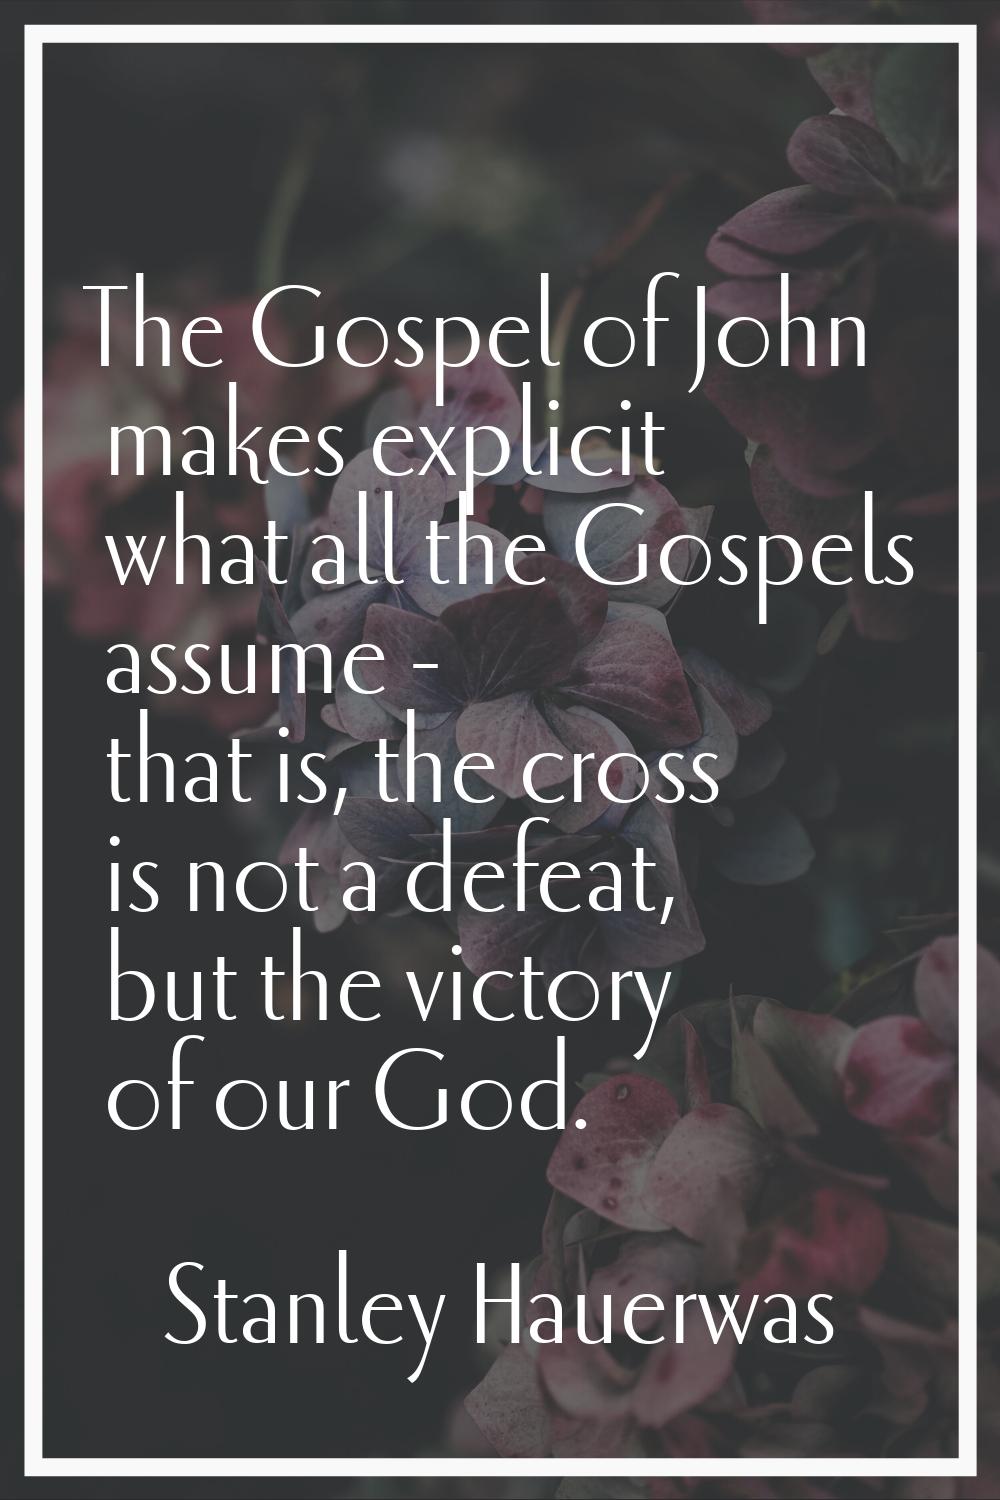 The Gospel of John makes explicit what all the Gospels assume - that is, the cross is not a defeat,